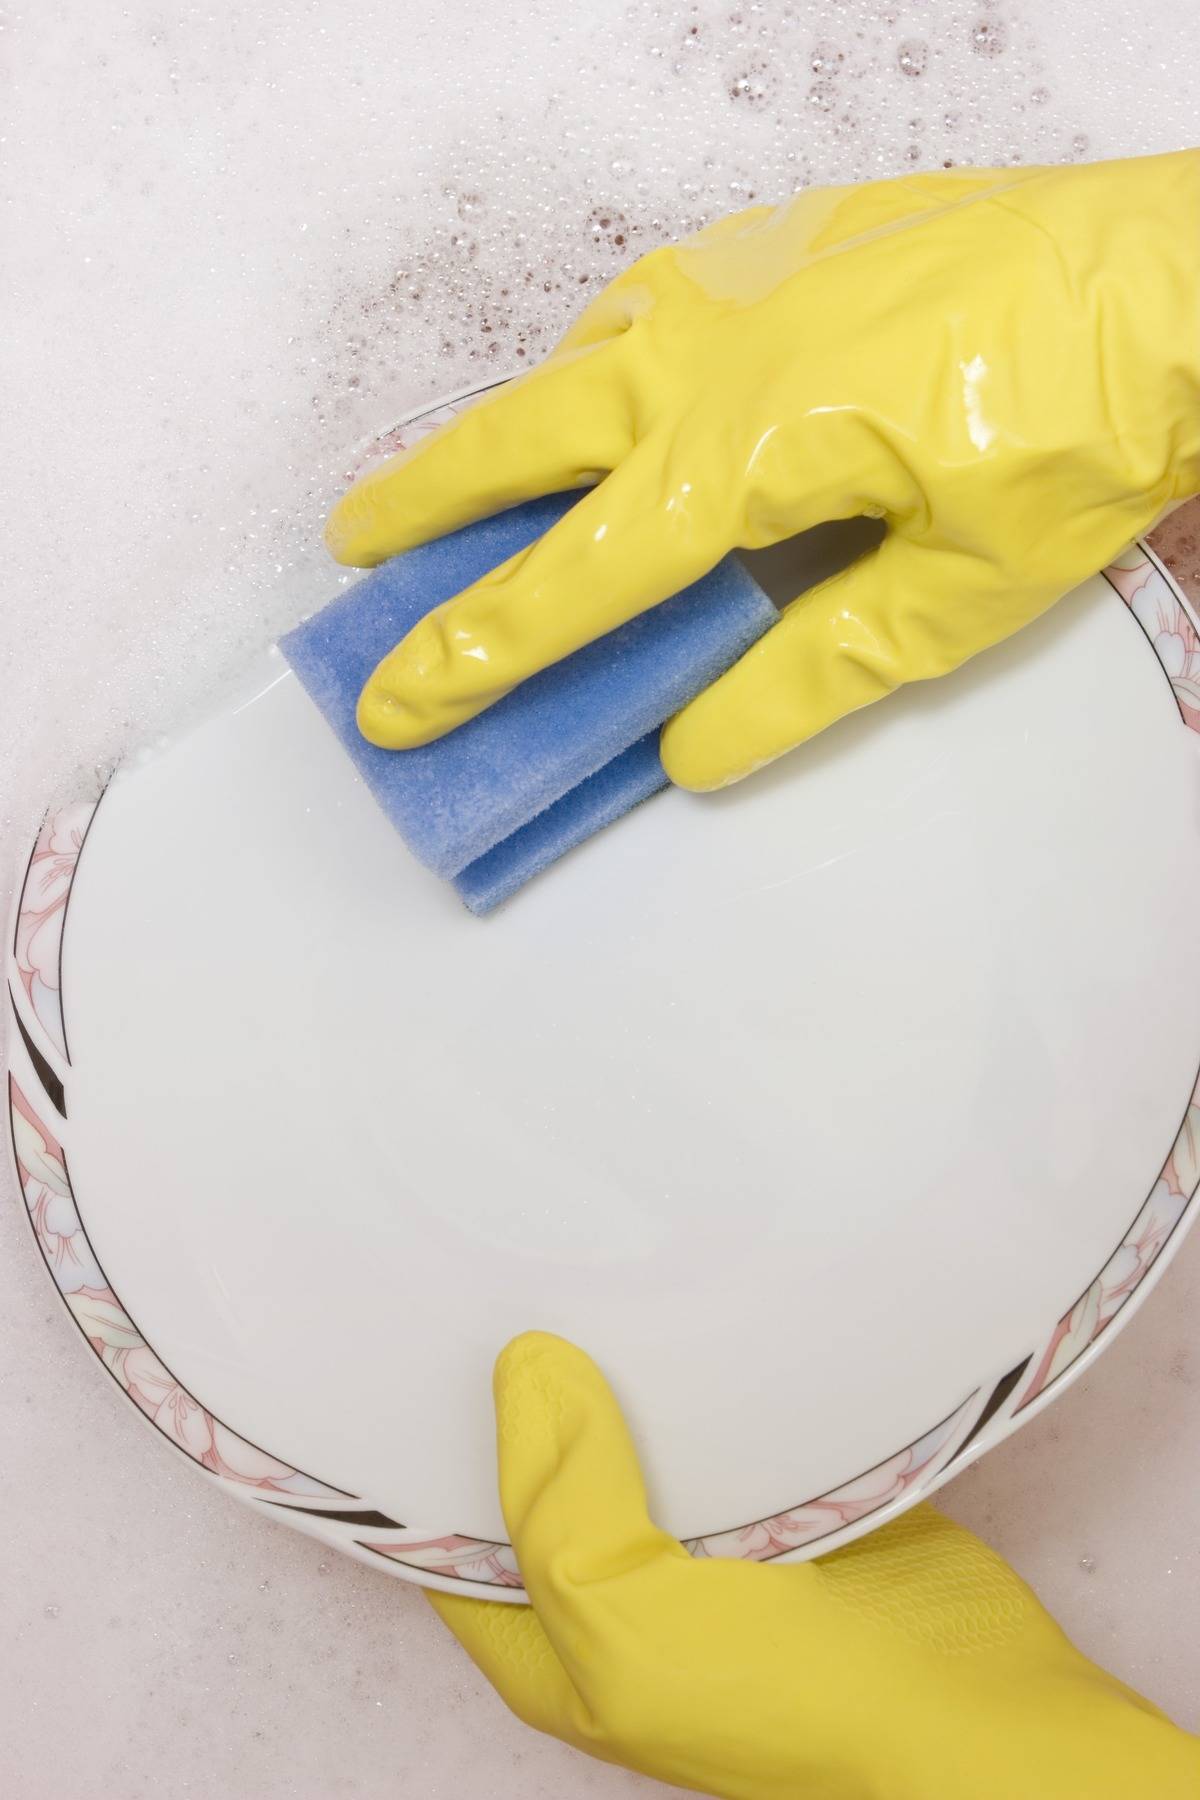 A person wearing gloves washes a dish with a sponge.